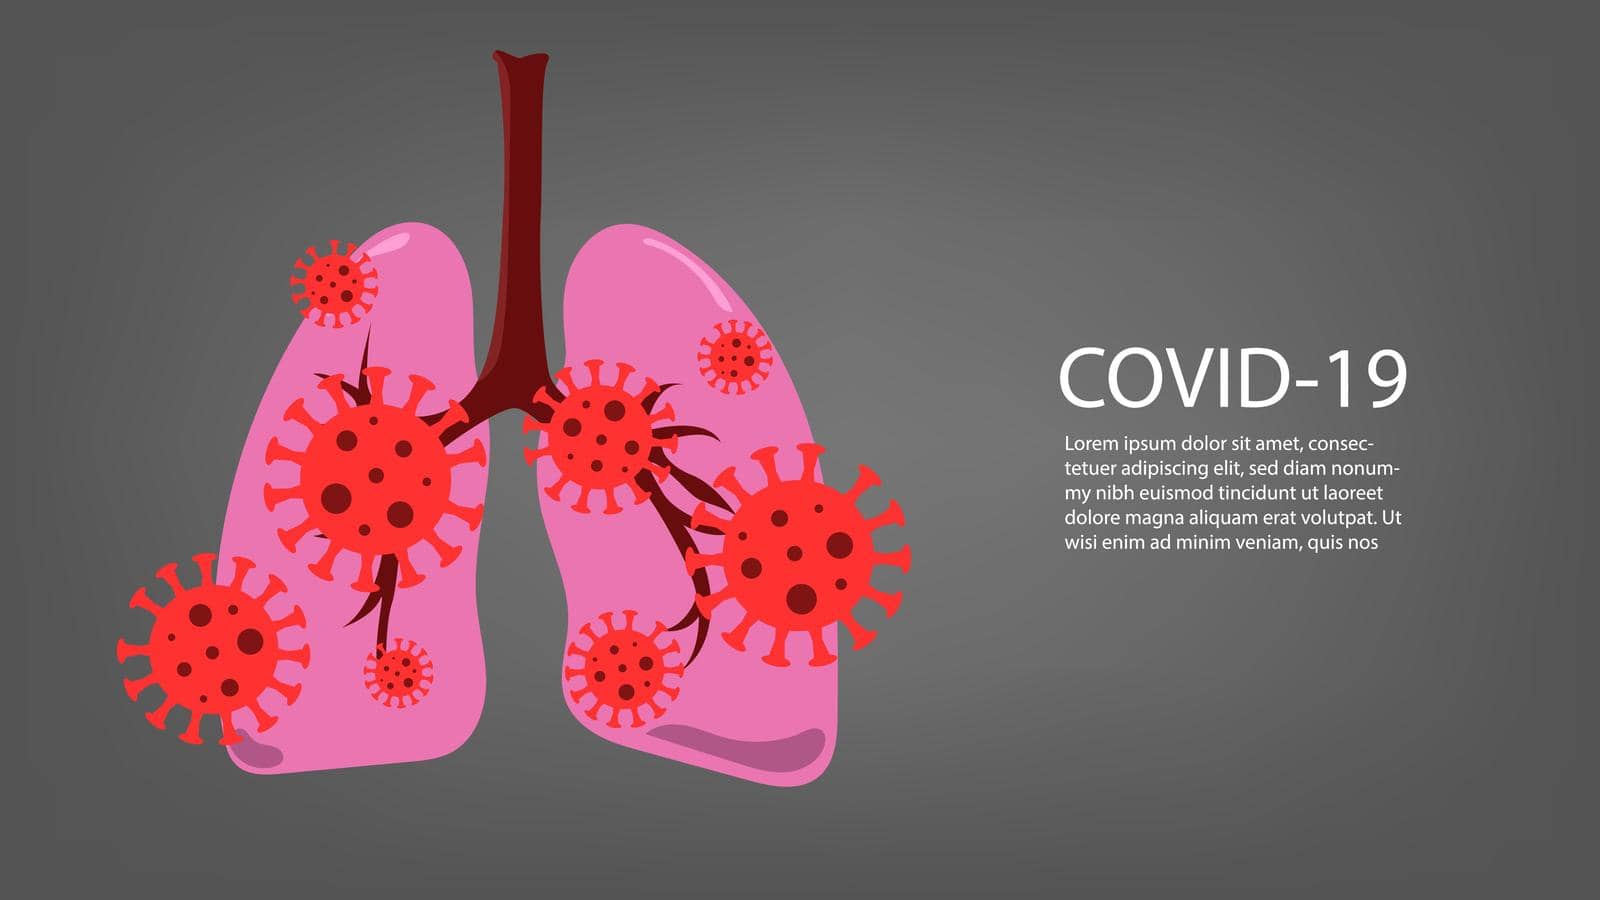 Virus cells in lung. Infected lungs. Coronavirus, COVID-19. 2019-nCoV. lung disease, pneumonia, asthma, cancer, tuberculosis. by Kongmeesuk